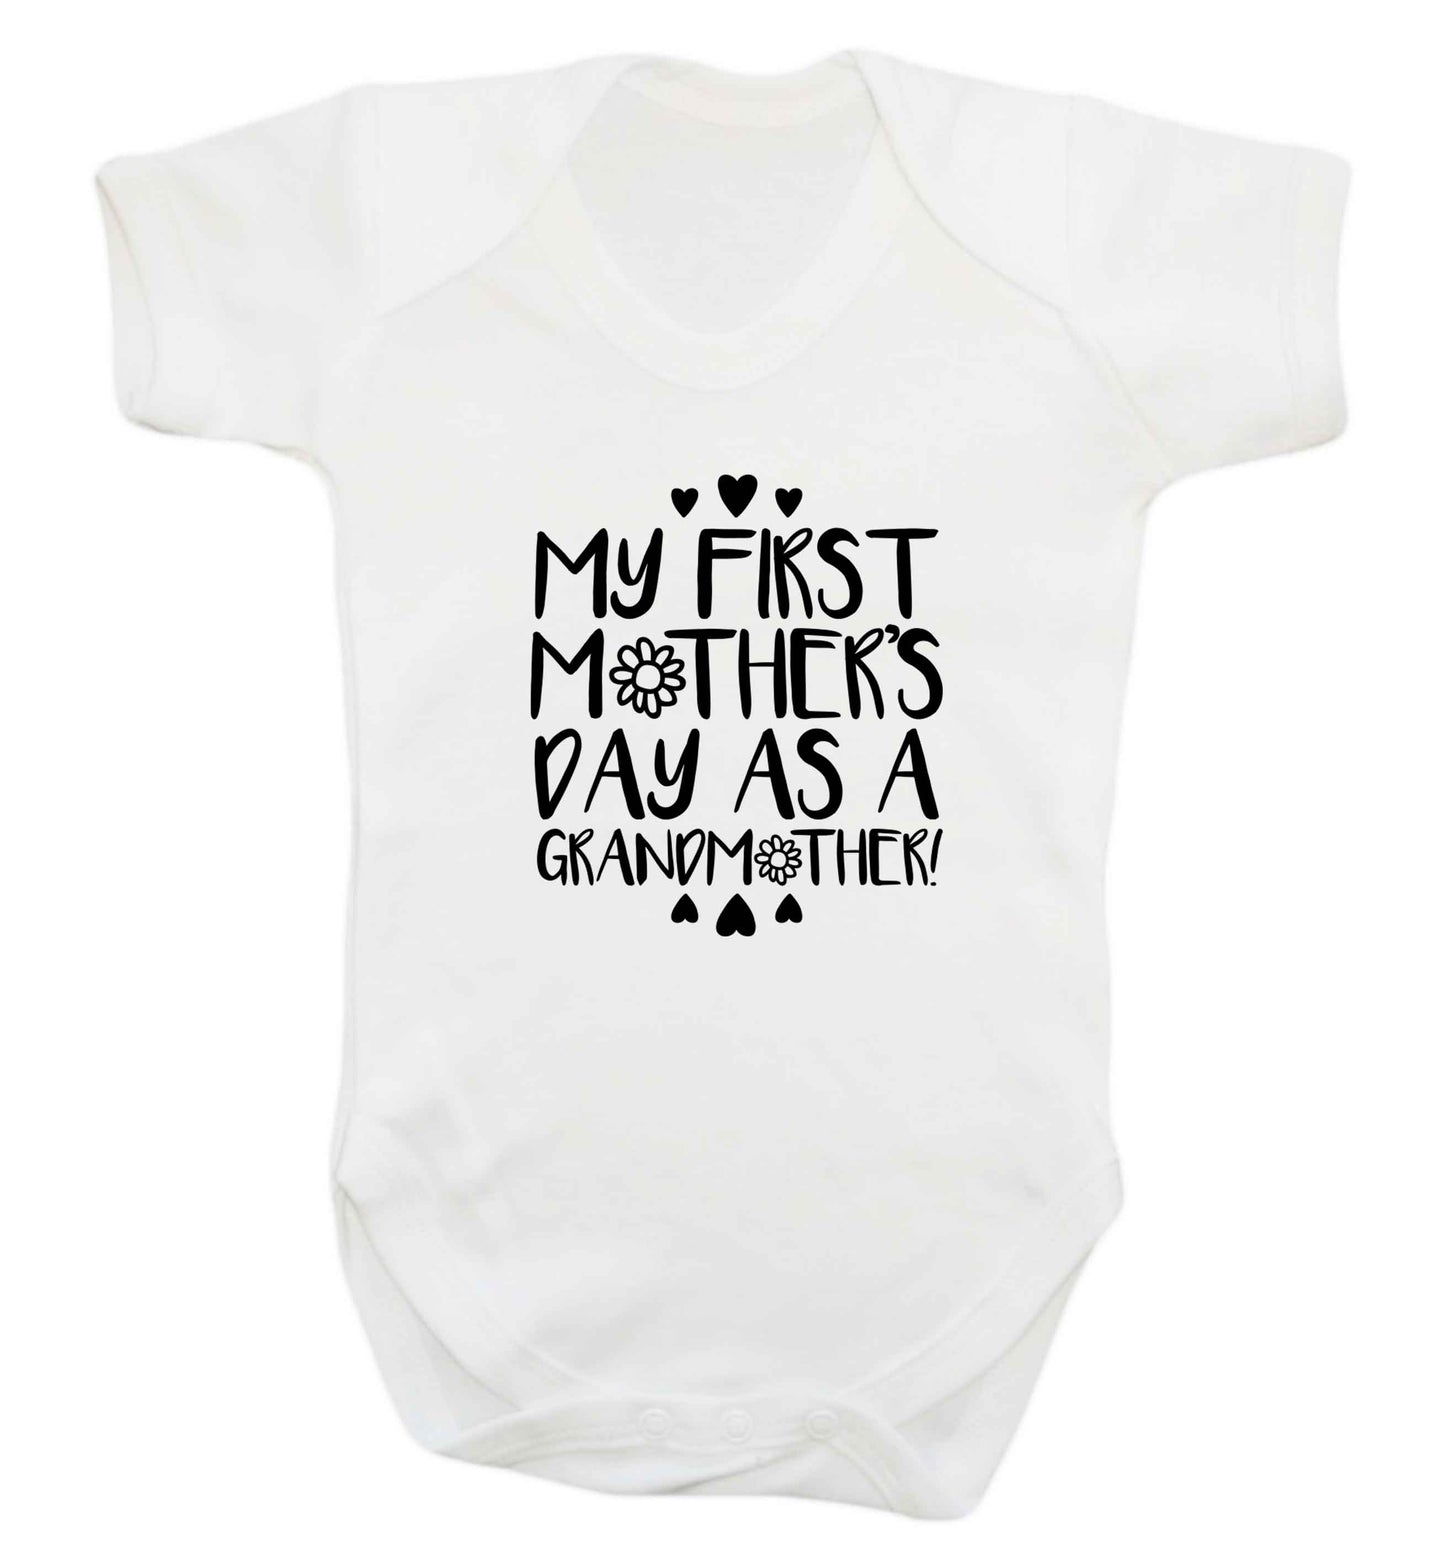 It's my first mother's day as a grandmother baby vest white 18-24 months